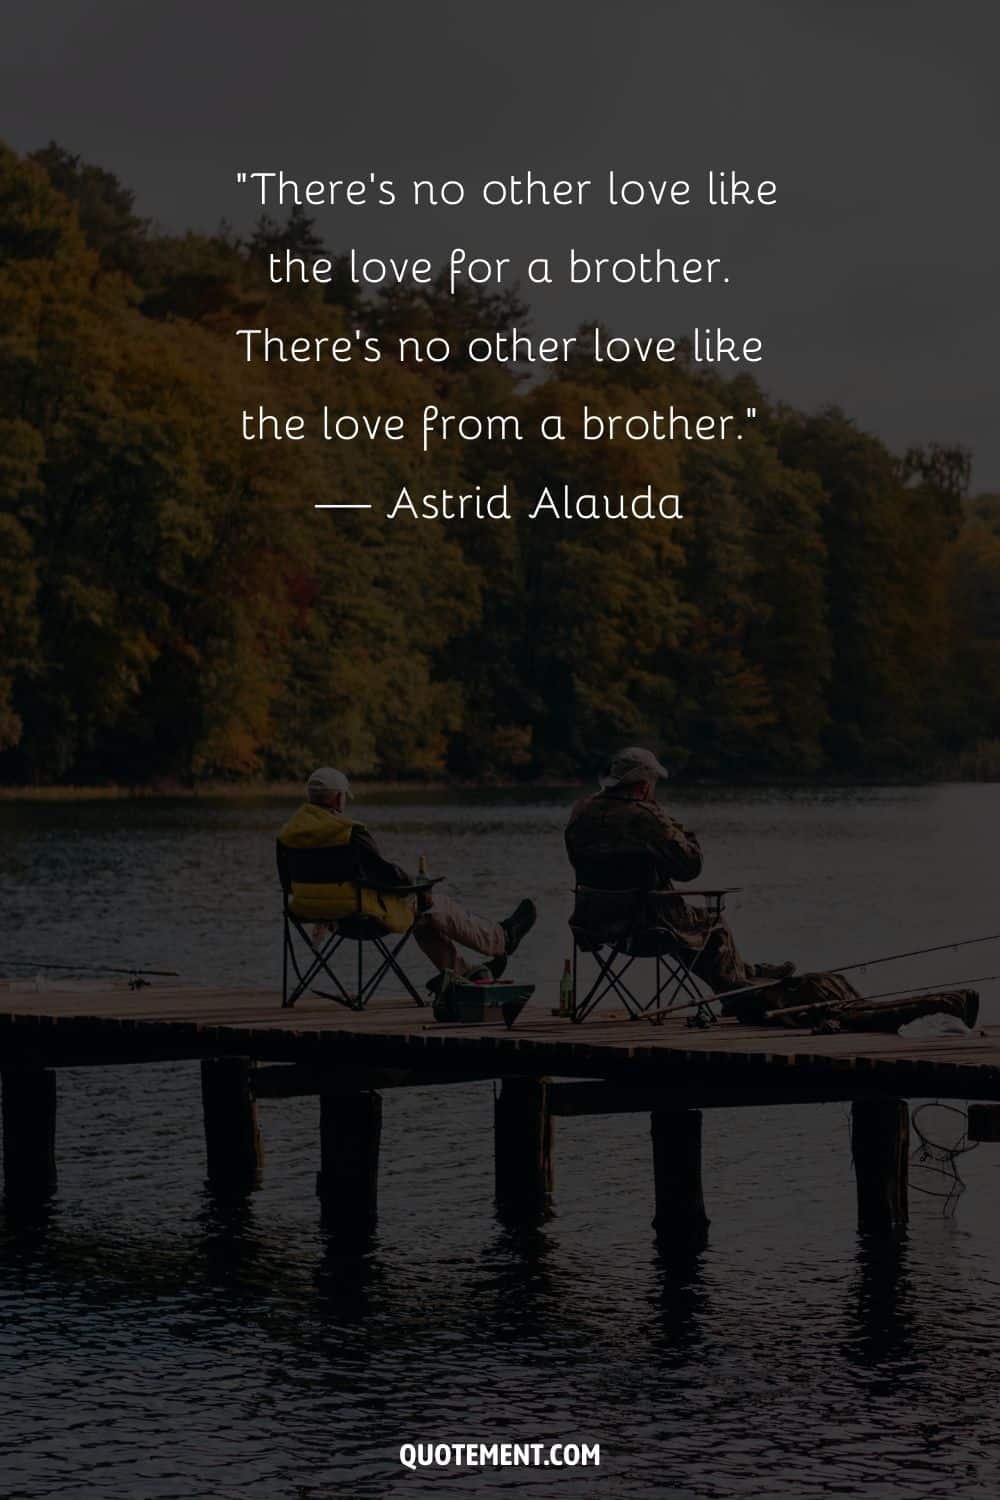 image of two fishermen representing brothers' love quote